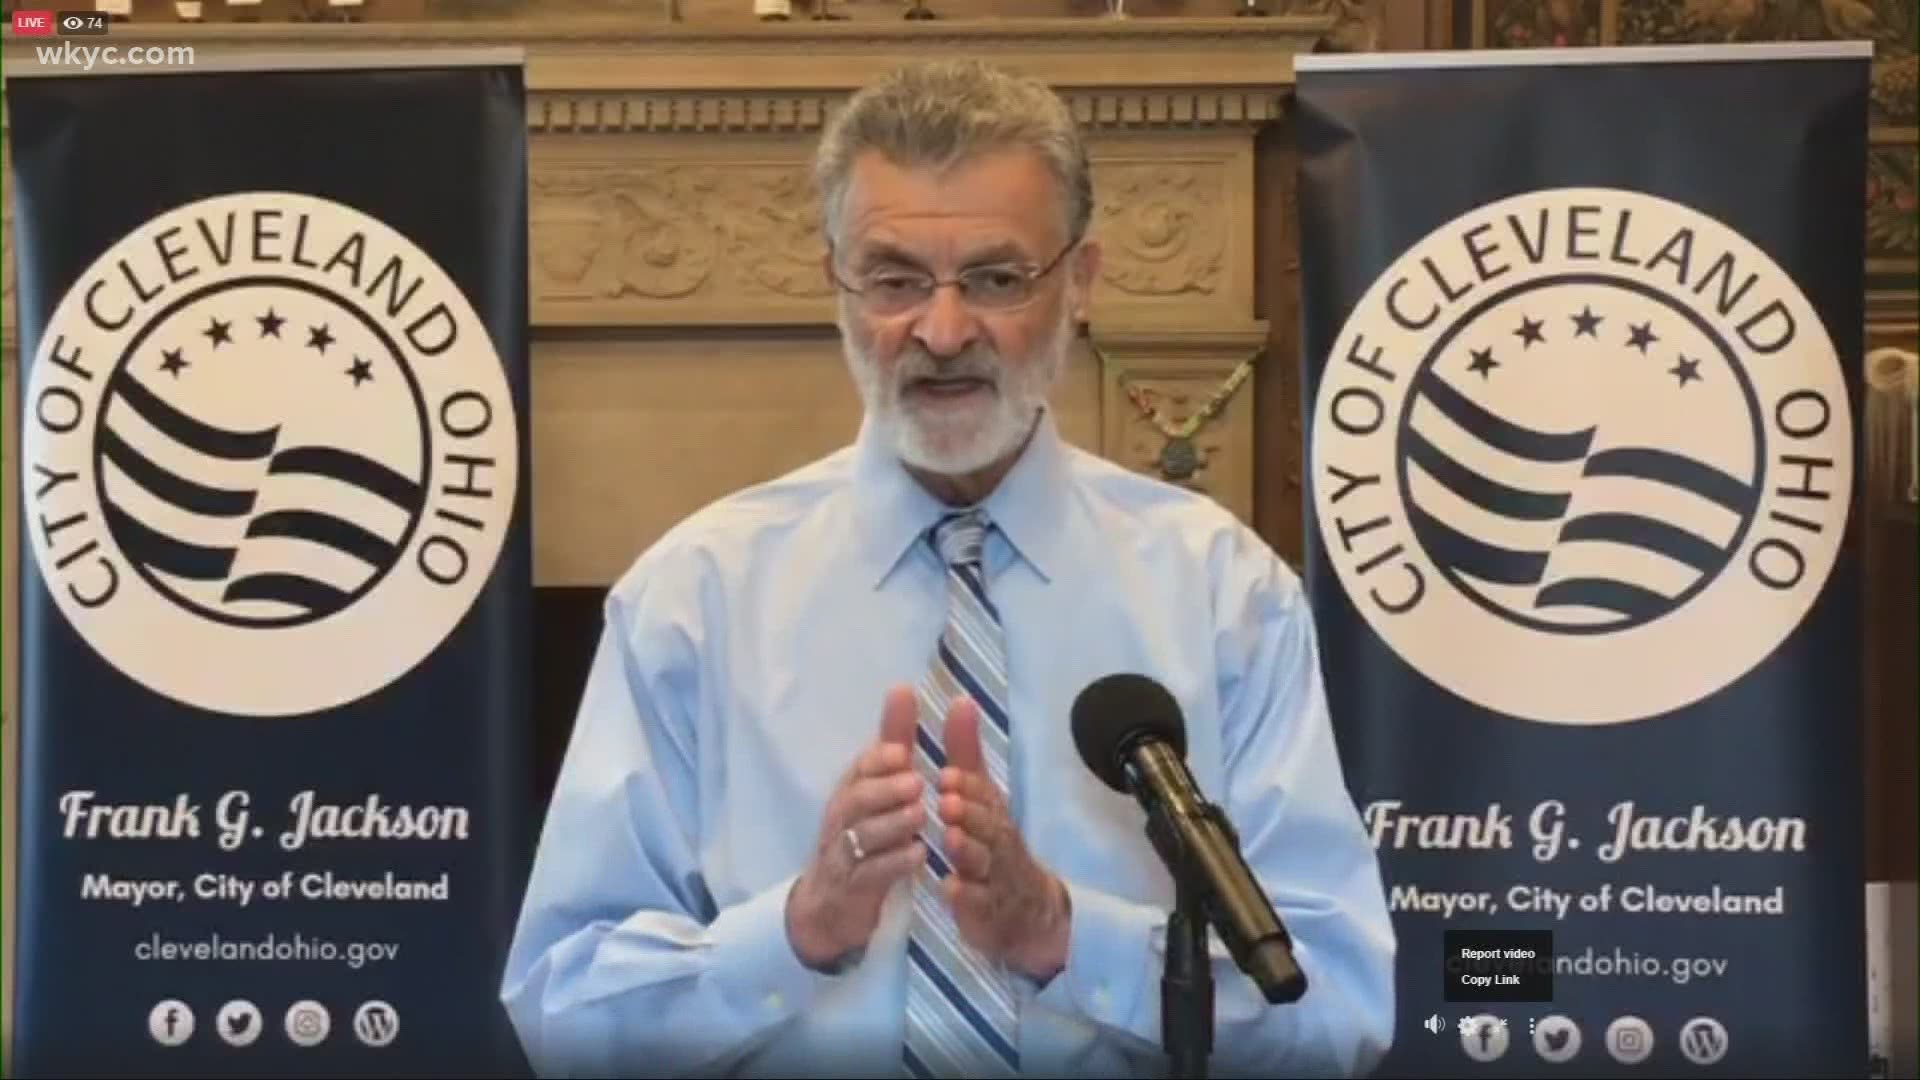 A big holiday weekend is upon us and many are thinking about the kick-off to summer. Cleveland Mayor Frank Jackson announced some changes to potential summer plans.